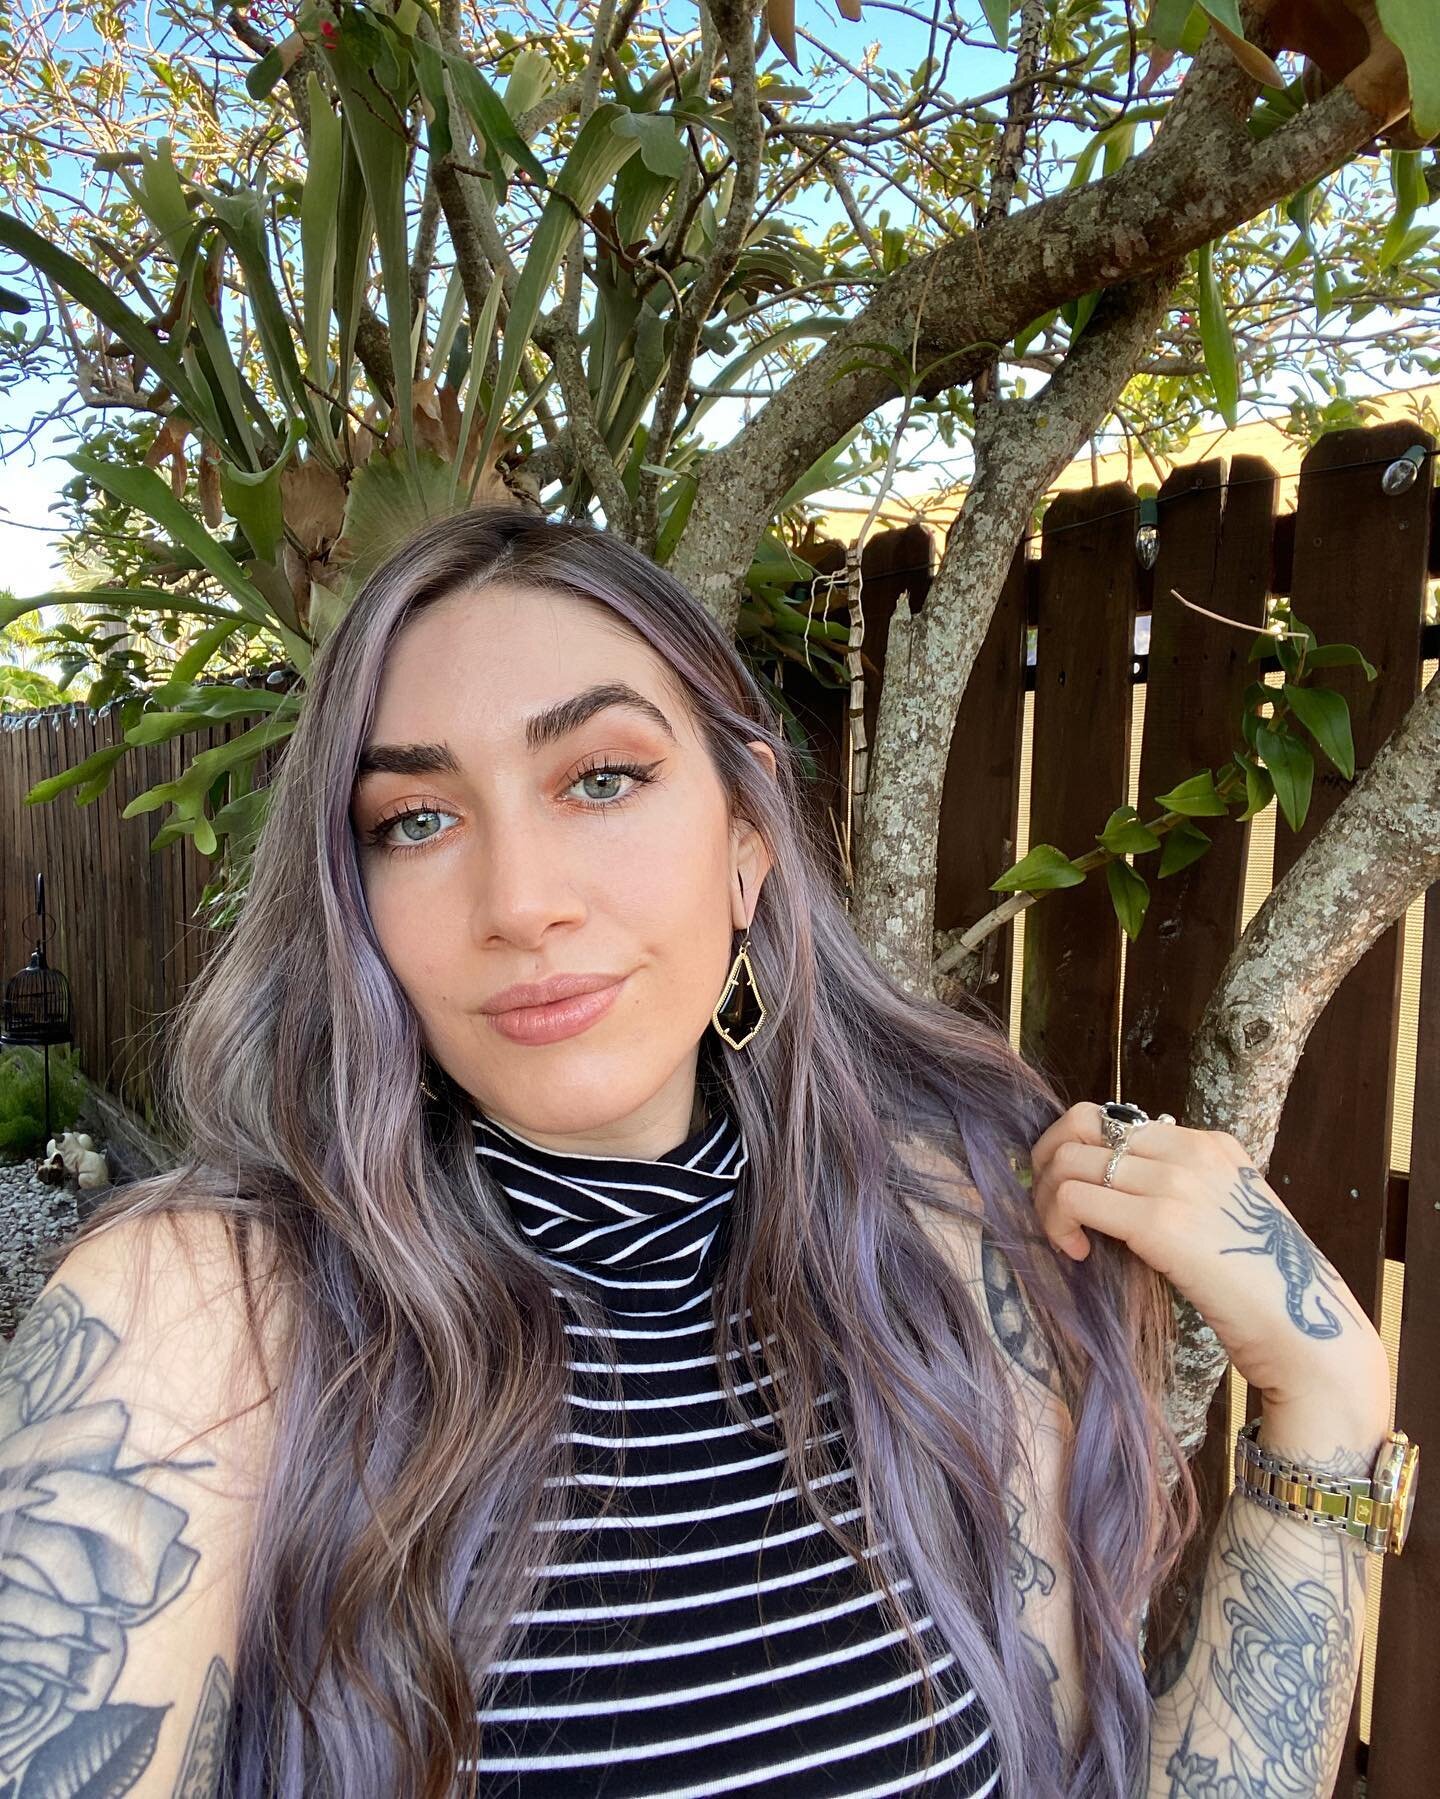 I haven&rsquo;t shown too much of my face on here recently, wanted to pop in on the feed and say THANK YOU to everyone for all the support recently! Also, I have purple hair again 😋

Do you guys like seeing just brows on my feed, or want a lil bit o